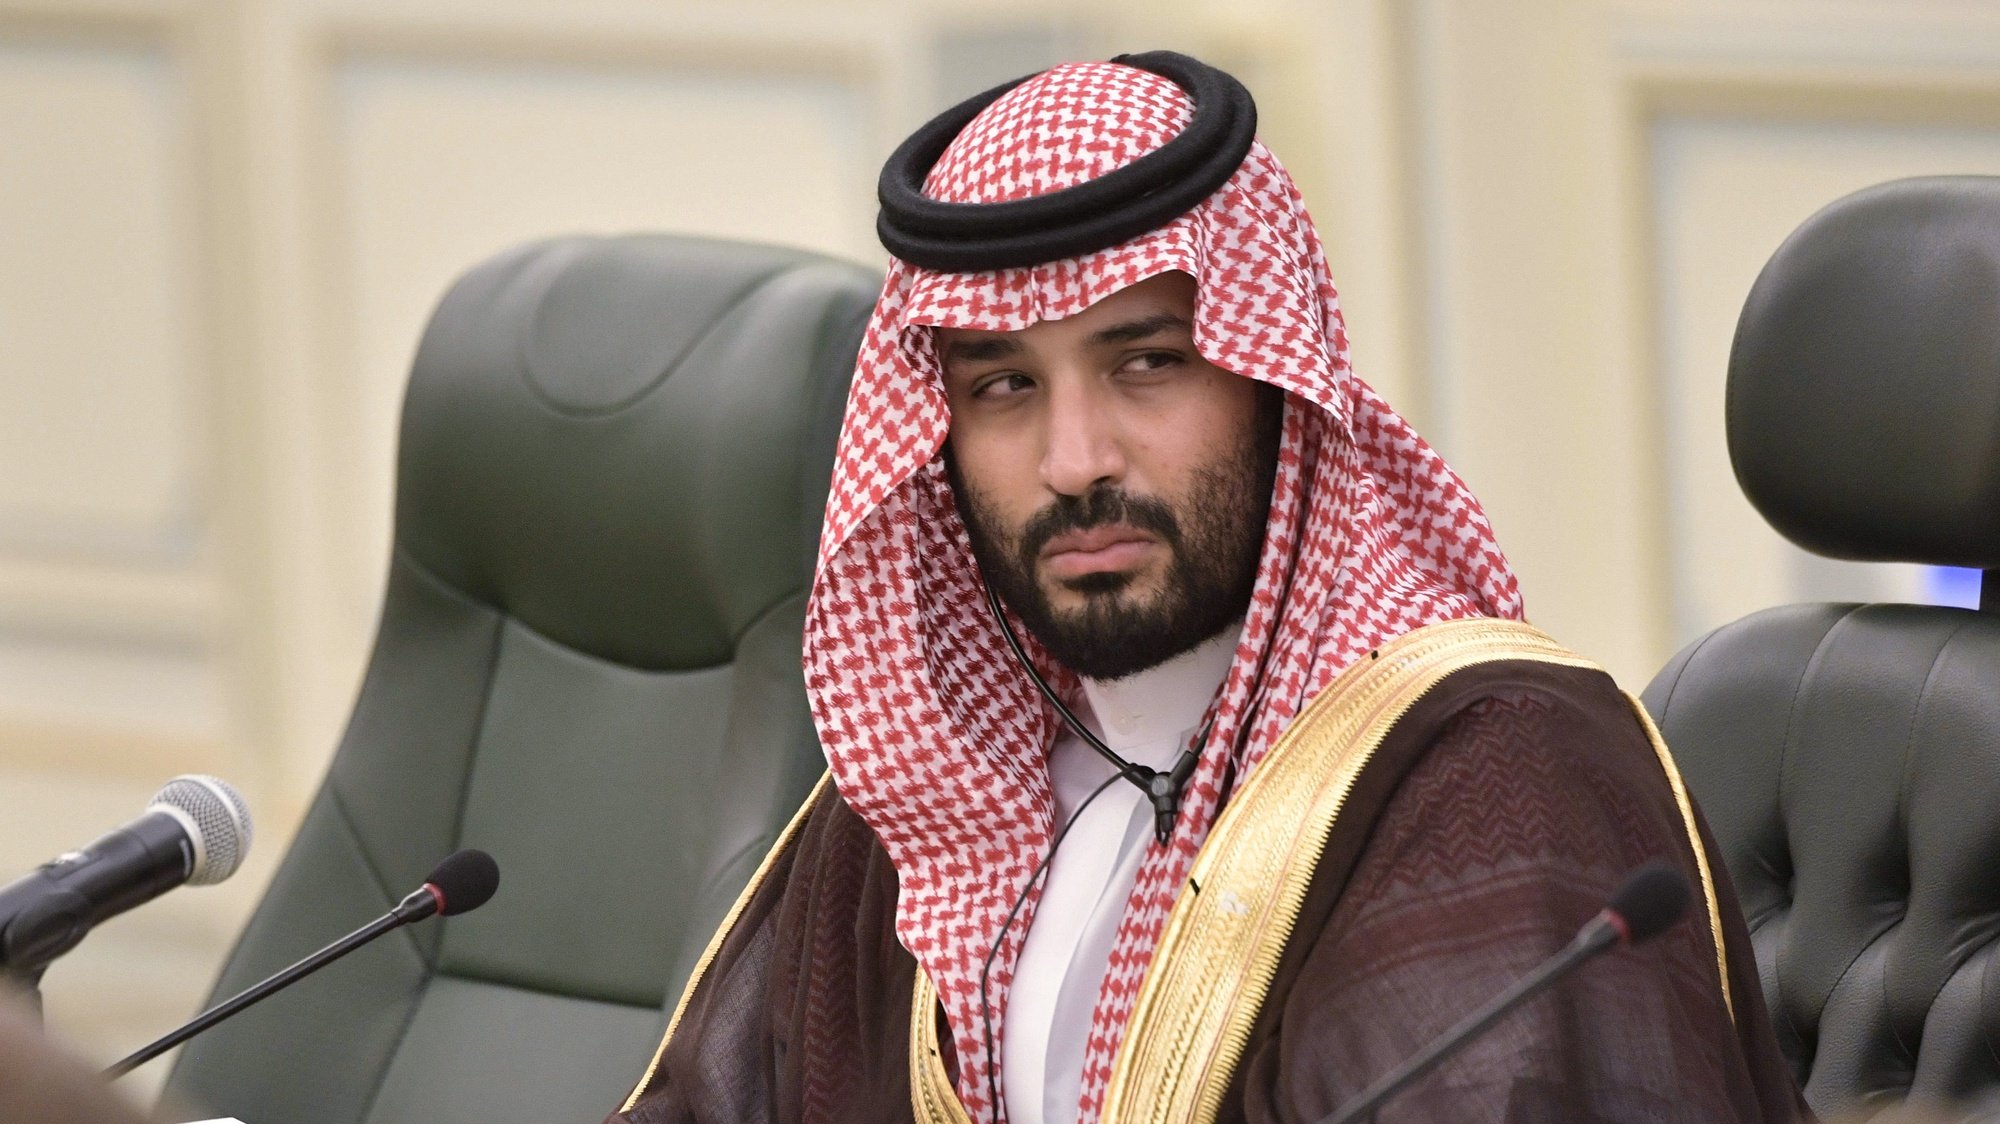 epa08151281 (FILE) - Saudi Arabia&#039;s Crown Prince Mohammed bin Salman attends a meeting with Russian President Vladimir Putin (not pictured) at the Saudi Royal palace in Riyadh, Saudi Arabia, 14 October 2019 (reissued 22 January 2020). According to media reports, the phone of Amazon CEO Jeff Bezos appears to have been hacked through a Whatsapp account allegedly belonging to Saudi Crown Prince Mohammed bin Salman, UN experts say.  EPA/ALEXEY NIKOLSKY/SPUTNIK/KREMLIN/ POOL MANDATORY CREDIT *** Local Caption *** 55547760